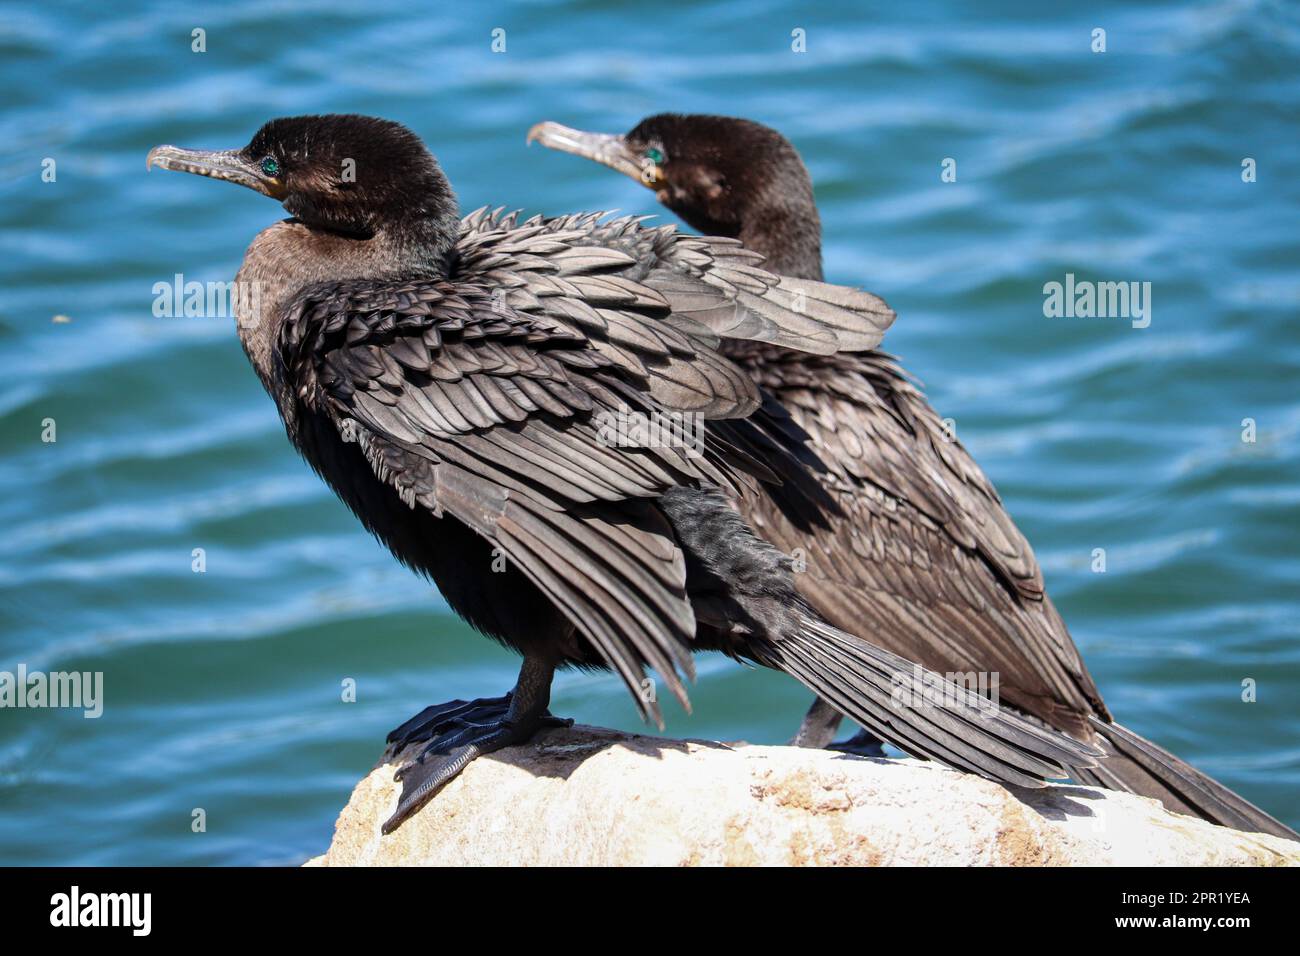 Neotropical cormorants or Nannopterum brasilianum standing on a rock at the Riparian water ranch in Arizona. Stock Photo